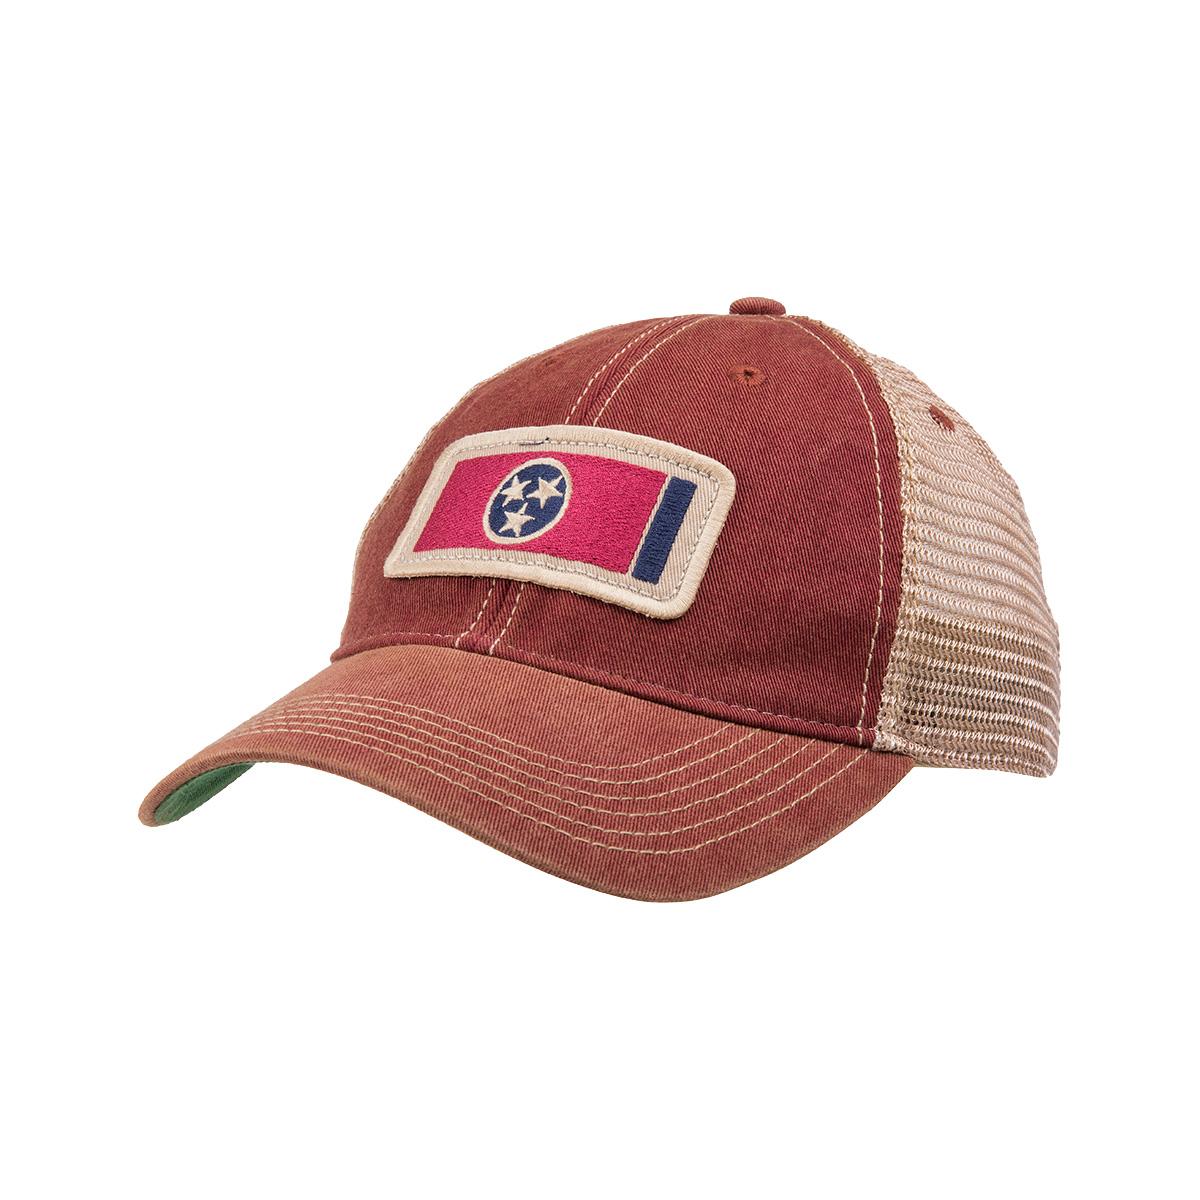 LEGACY HATS | Tennessee Flag Cardinal Trucker Hat